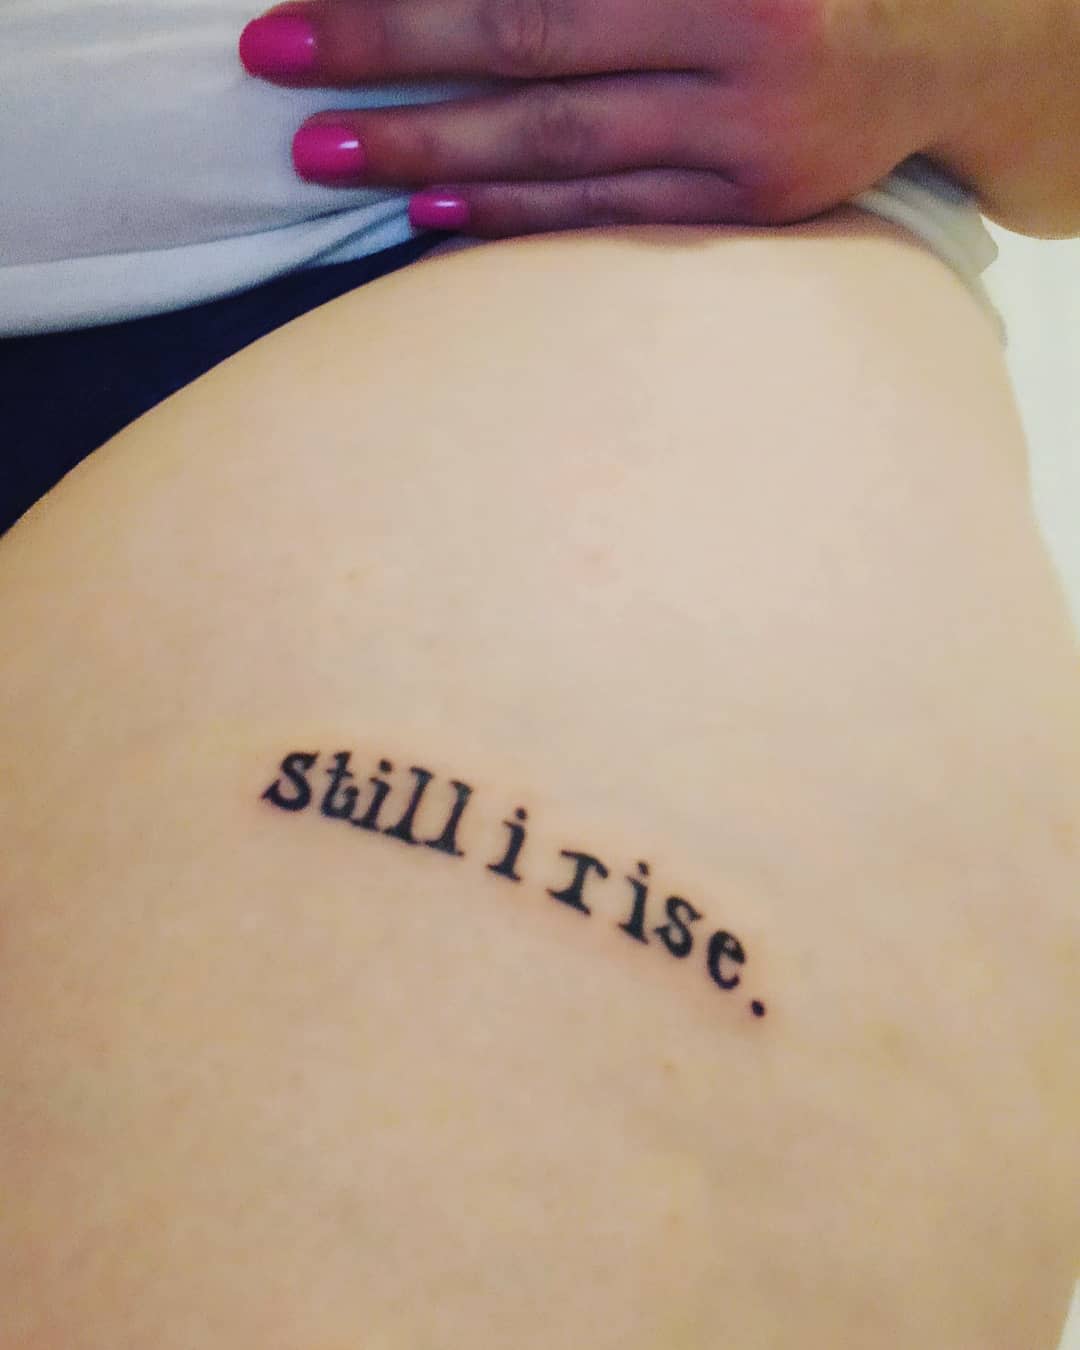 The Top 51 Still I Rise Tattoo Ideas 21 Inspiration Guide